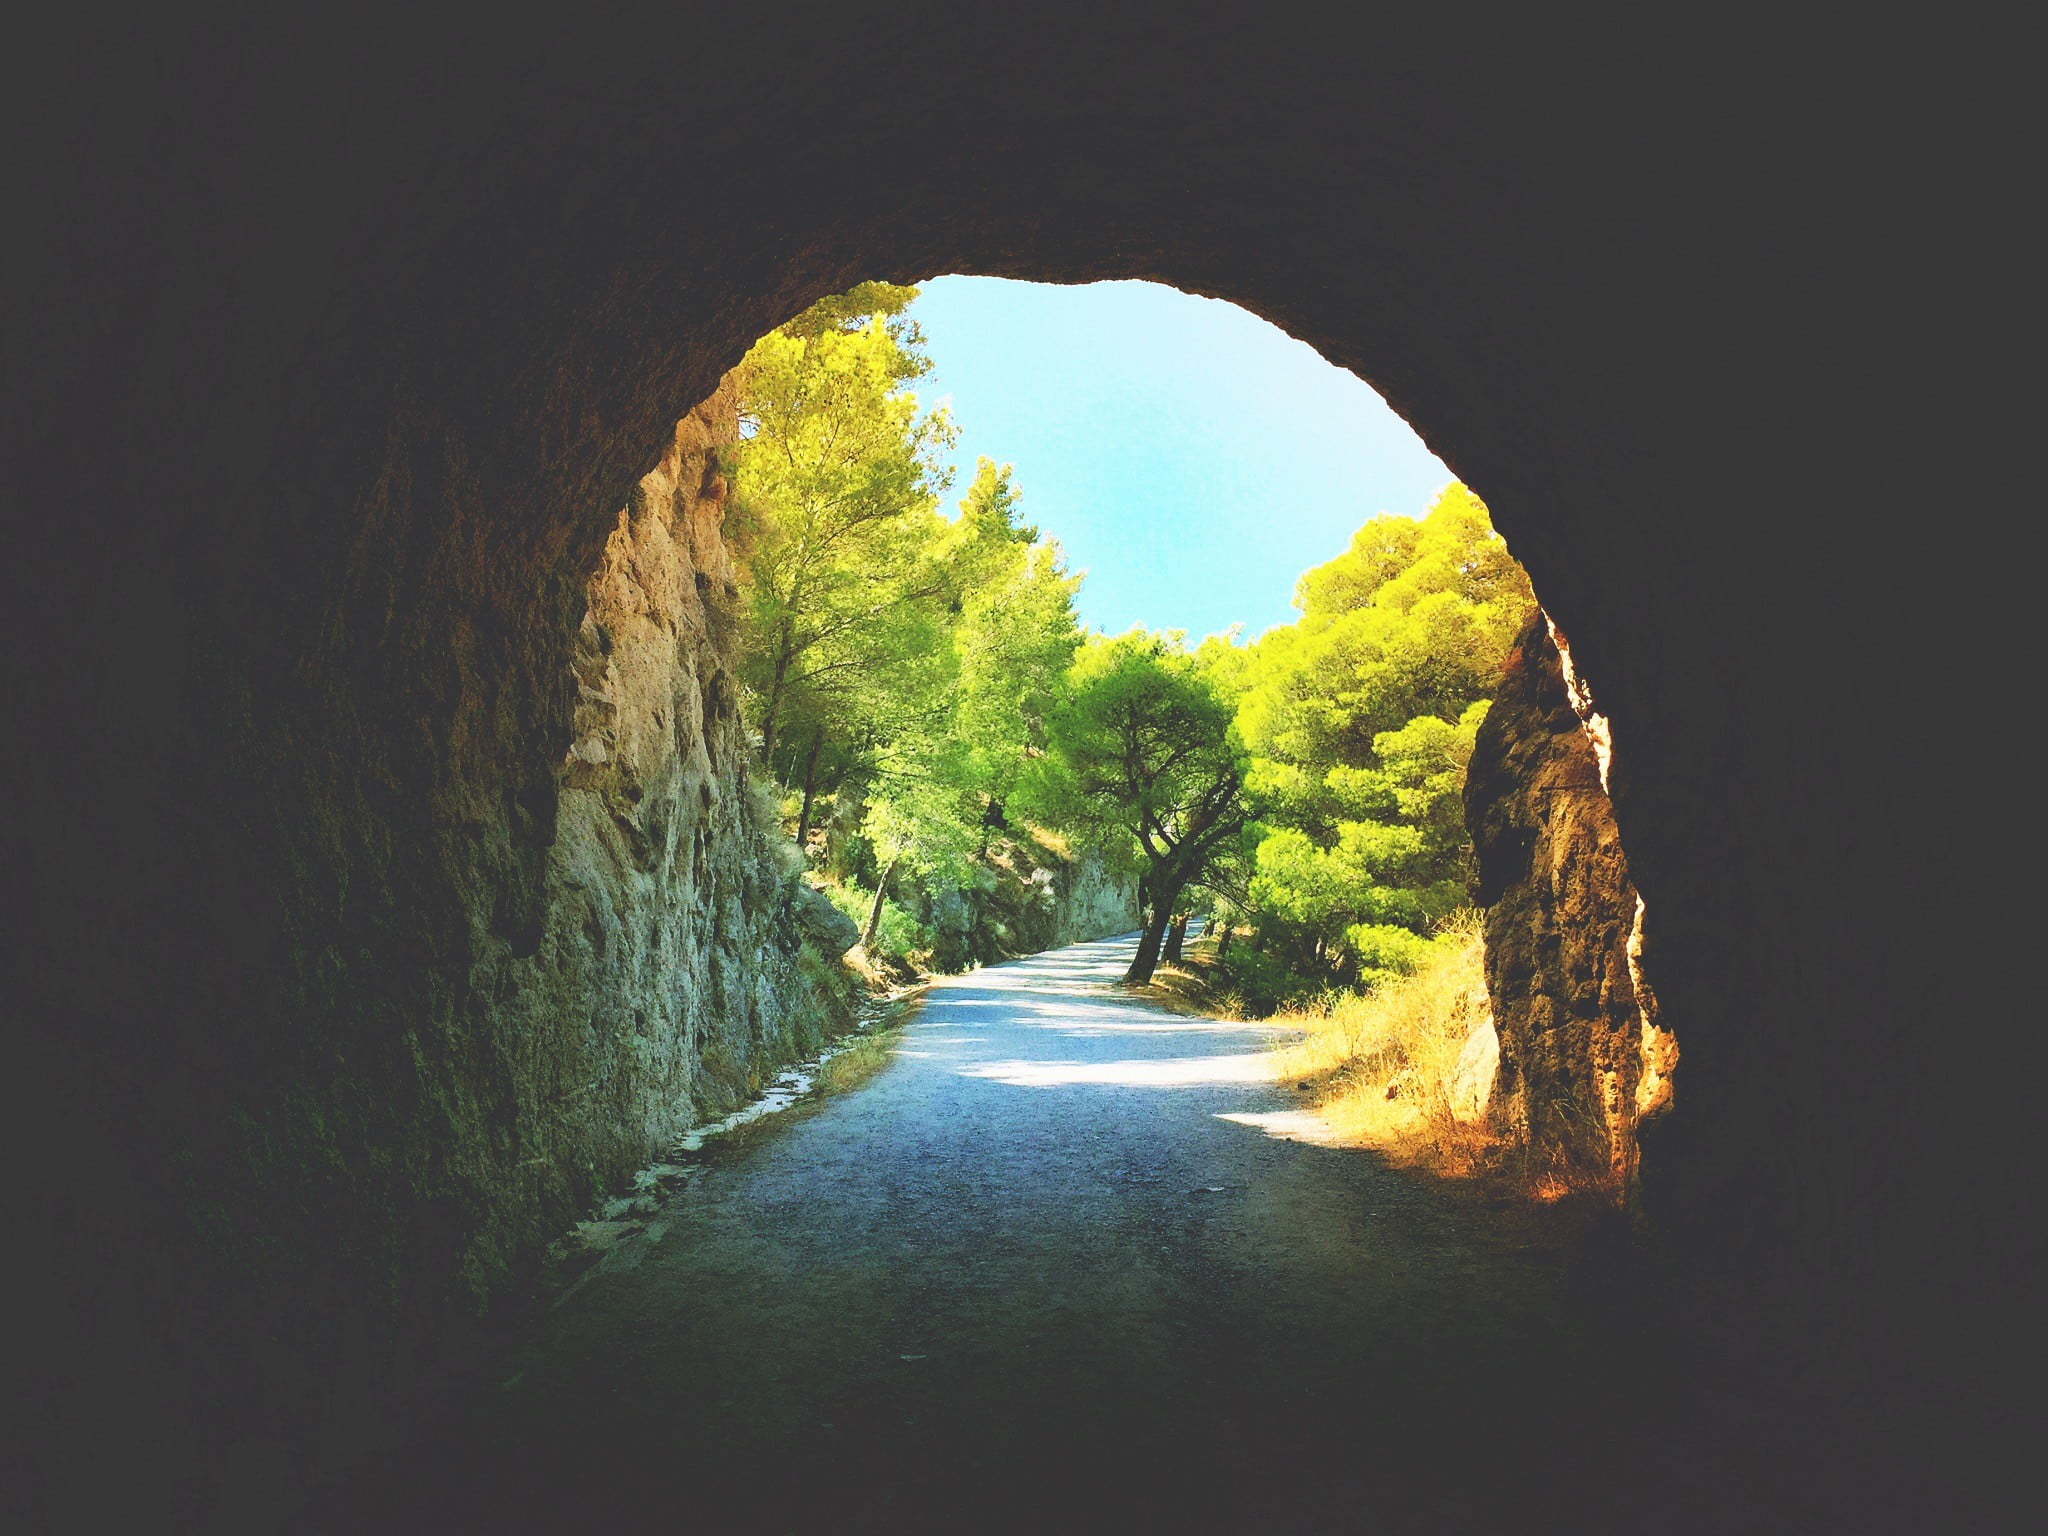 green leaf trees photo, nature, landscape, tunnel, path, rock